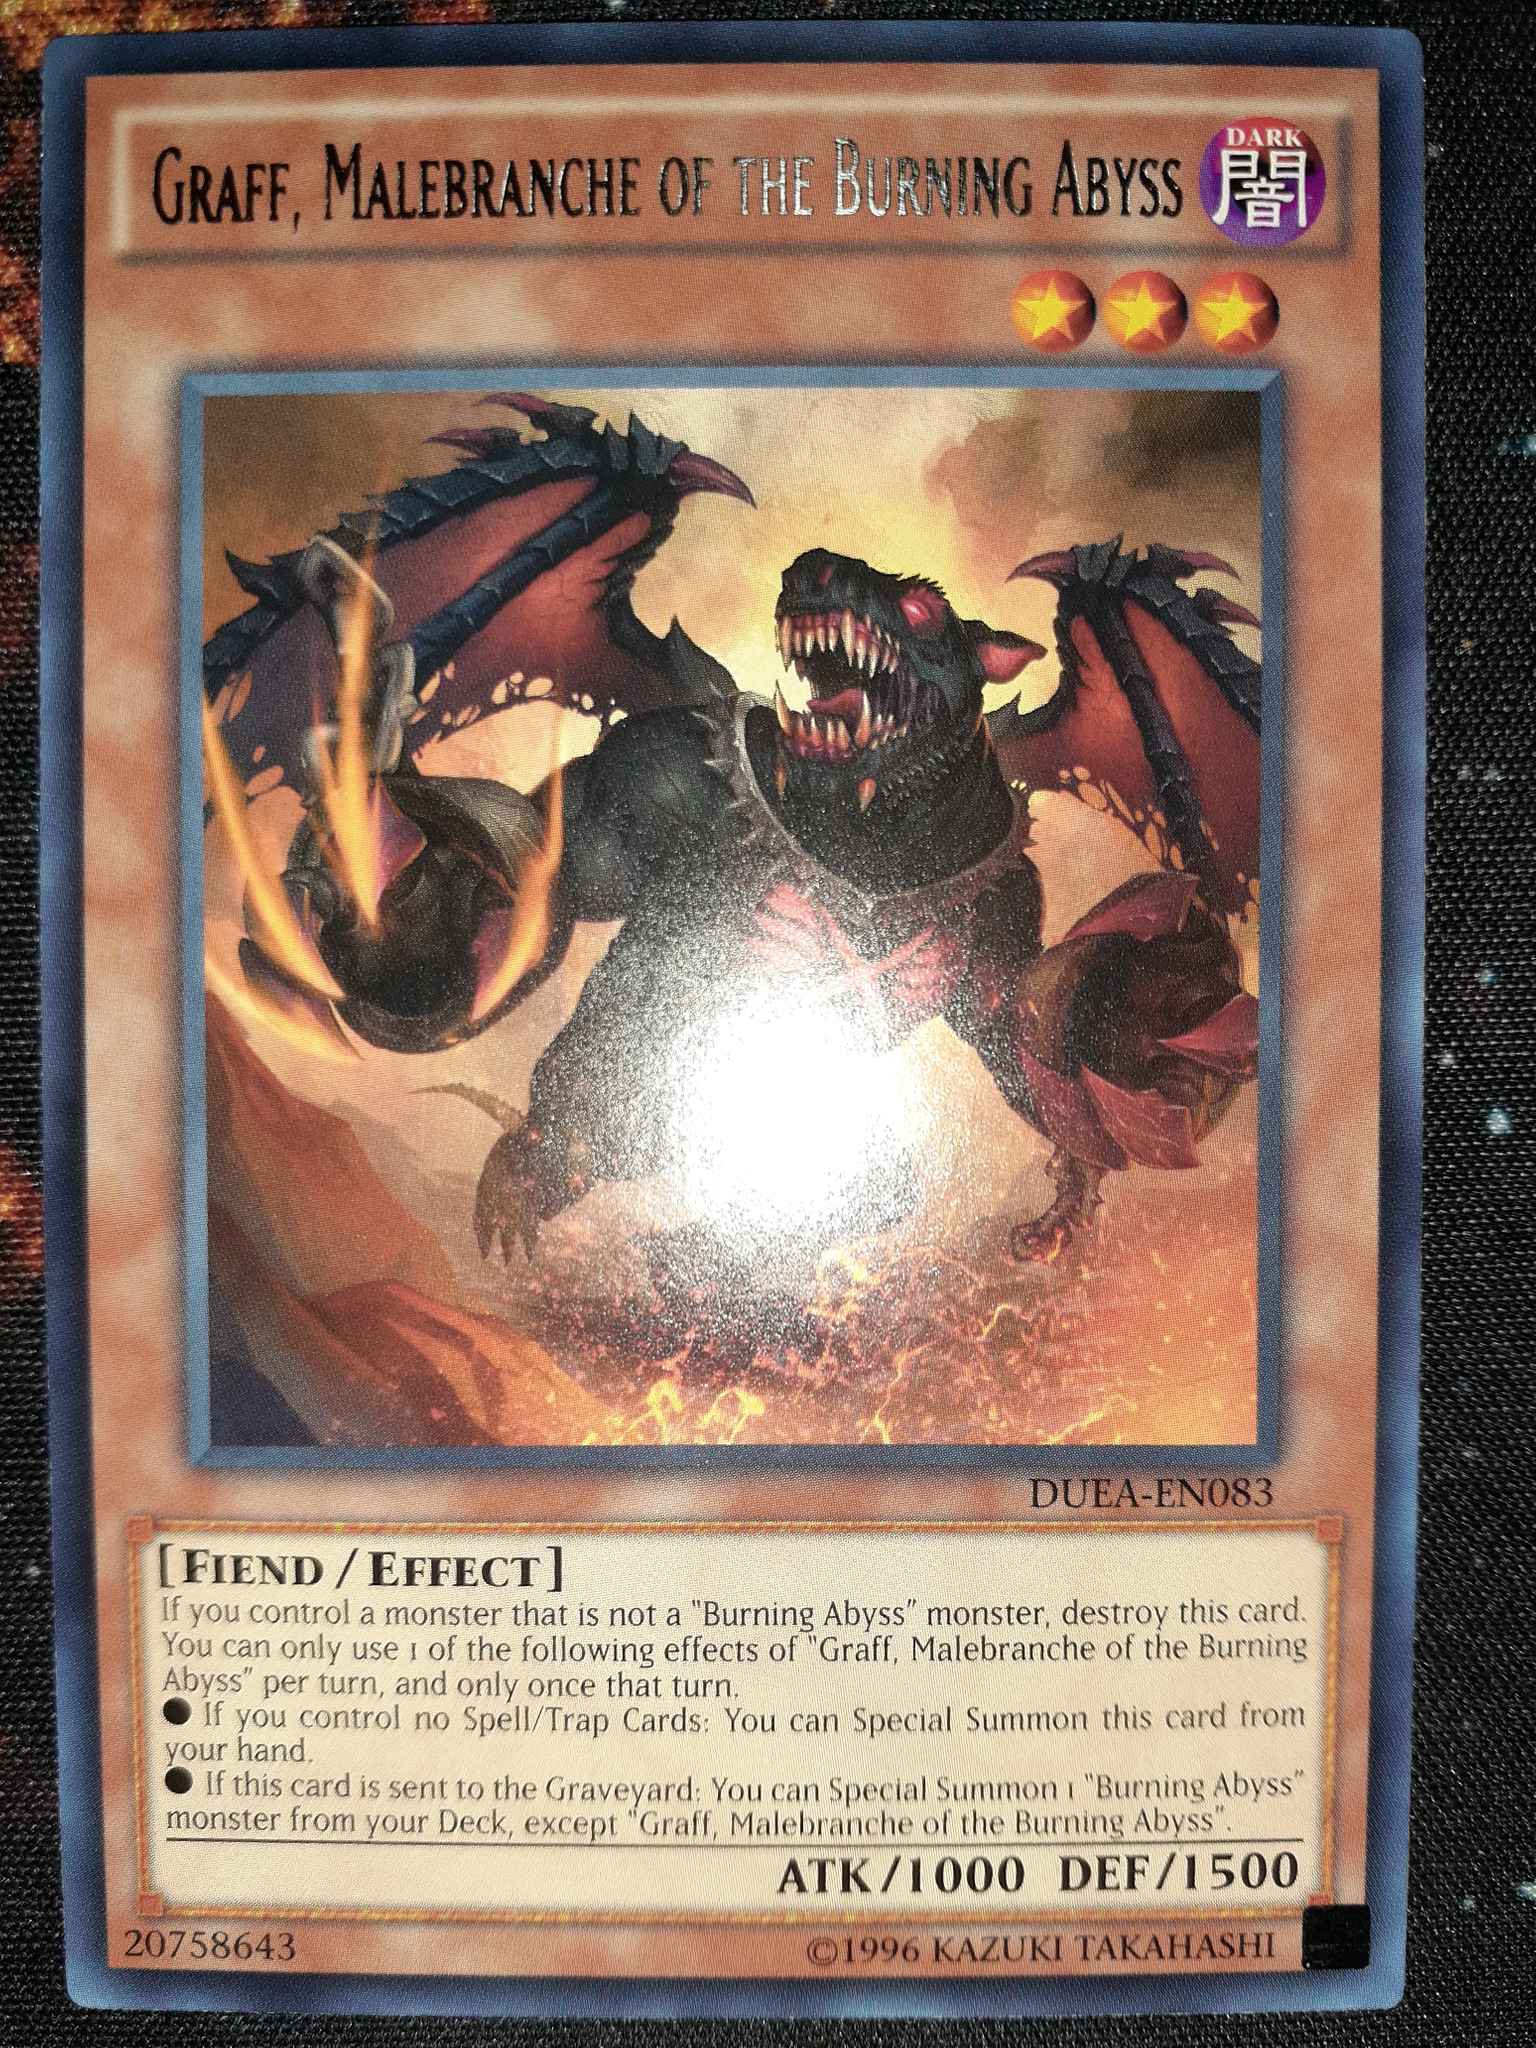 Graff PGL3-EN044 Gold Rare 1st Edition NM Malebranche of the Burning Abyss